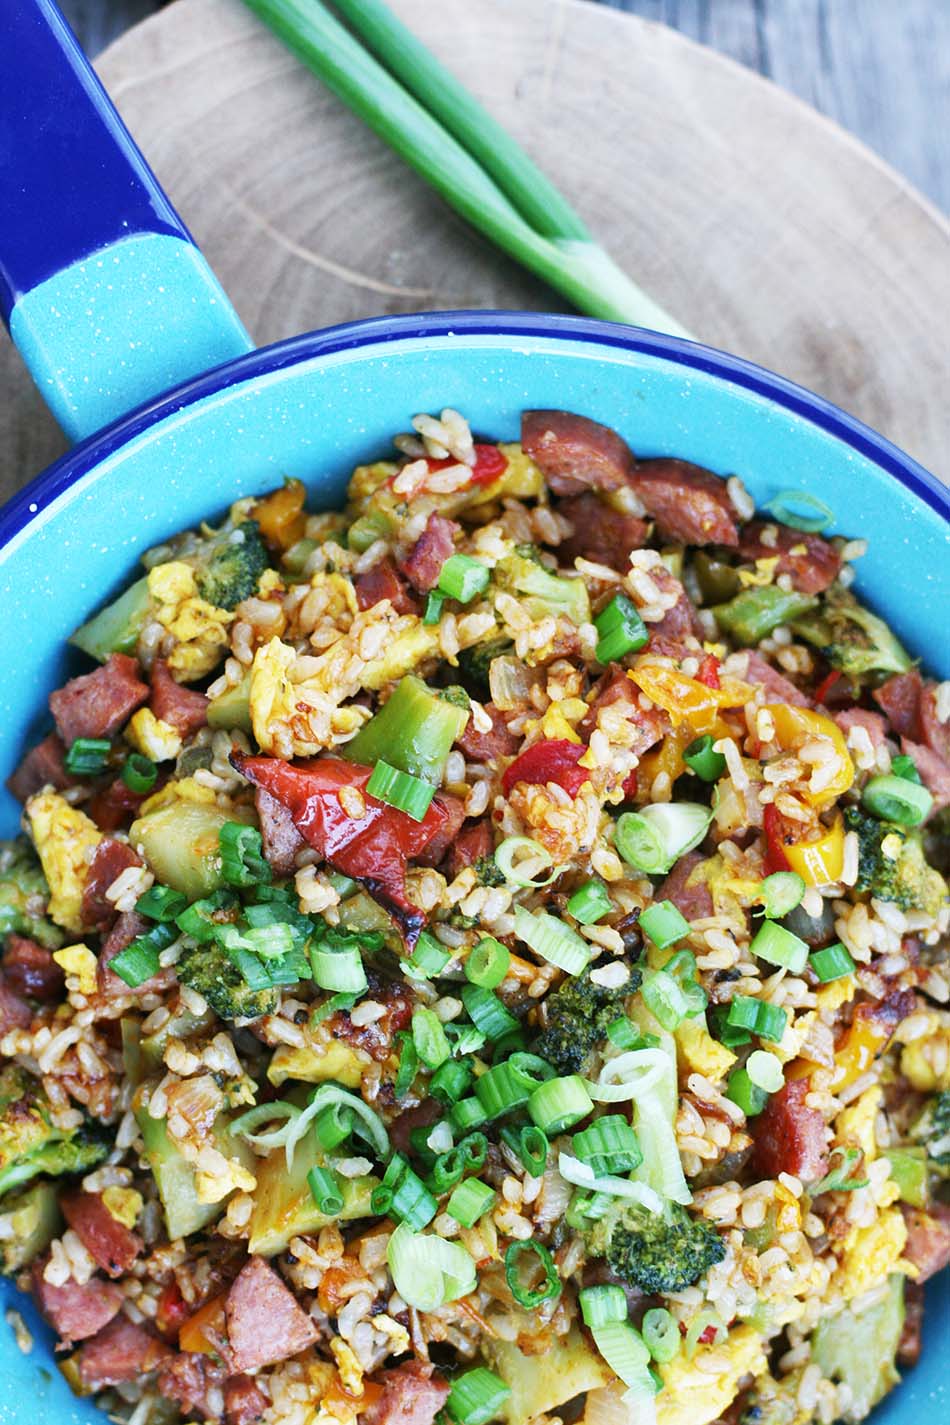 Kitchen sink fried rice: Make delicious use of leftovers and extra ingredients in your fridge and freezer.